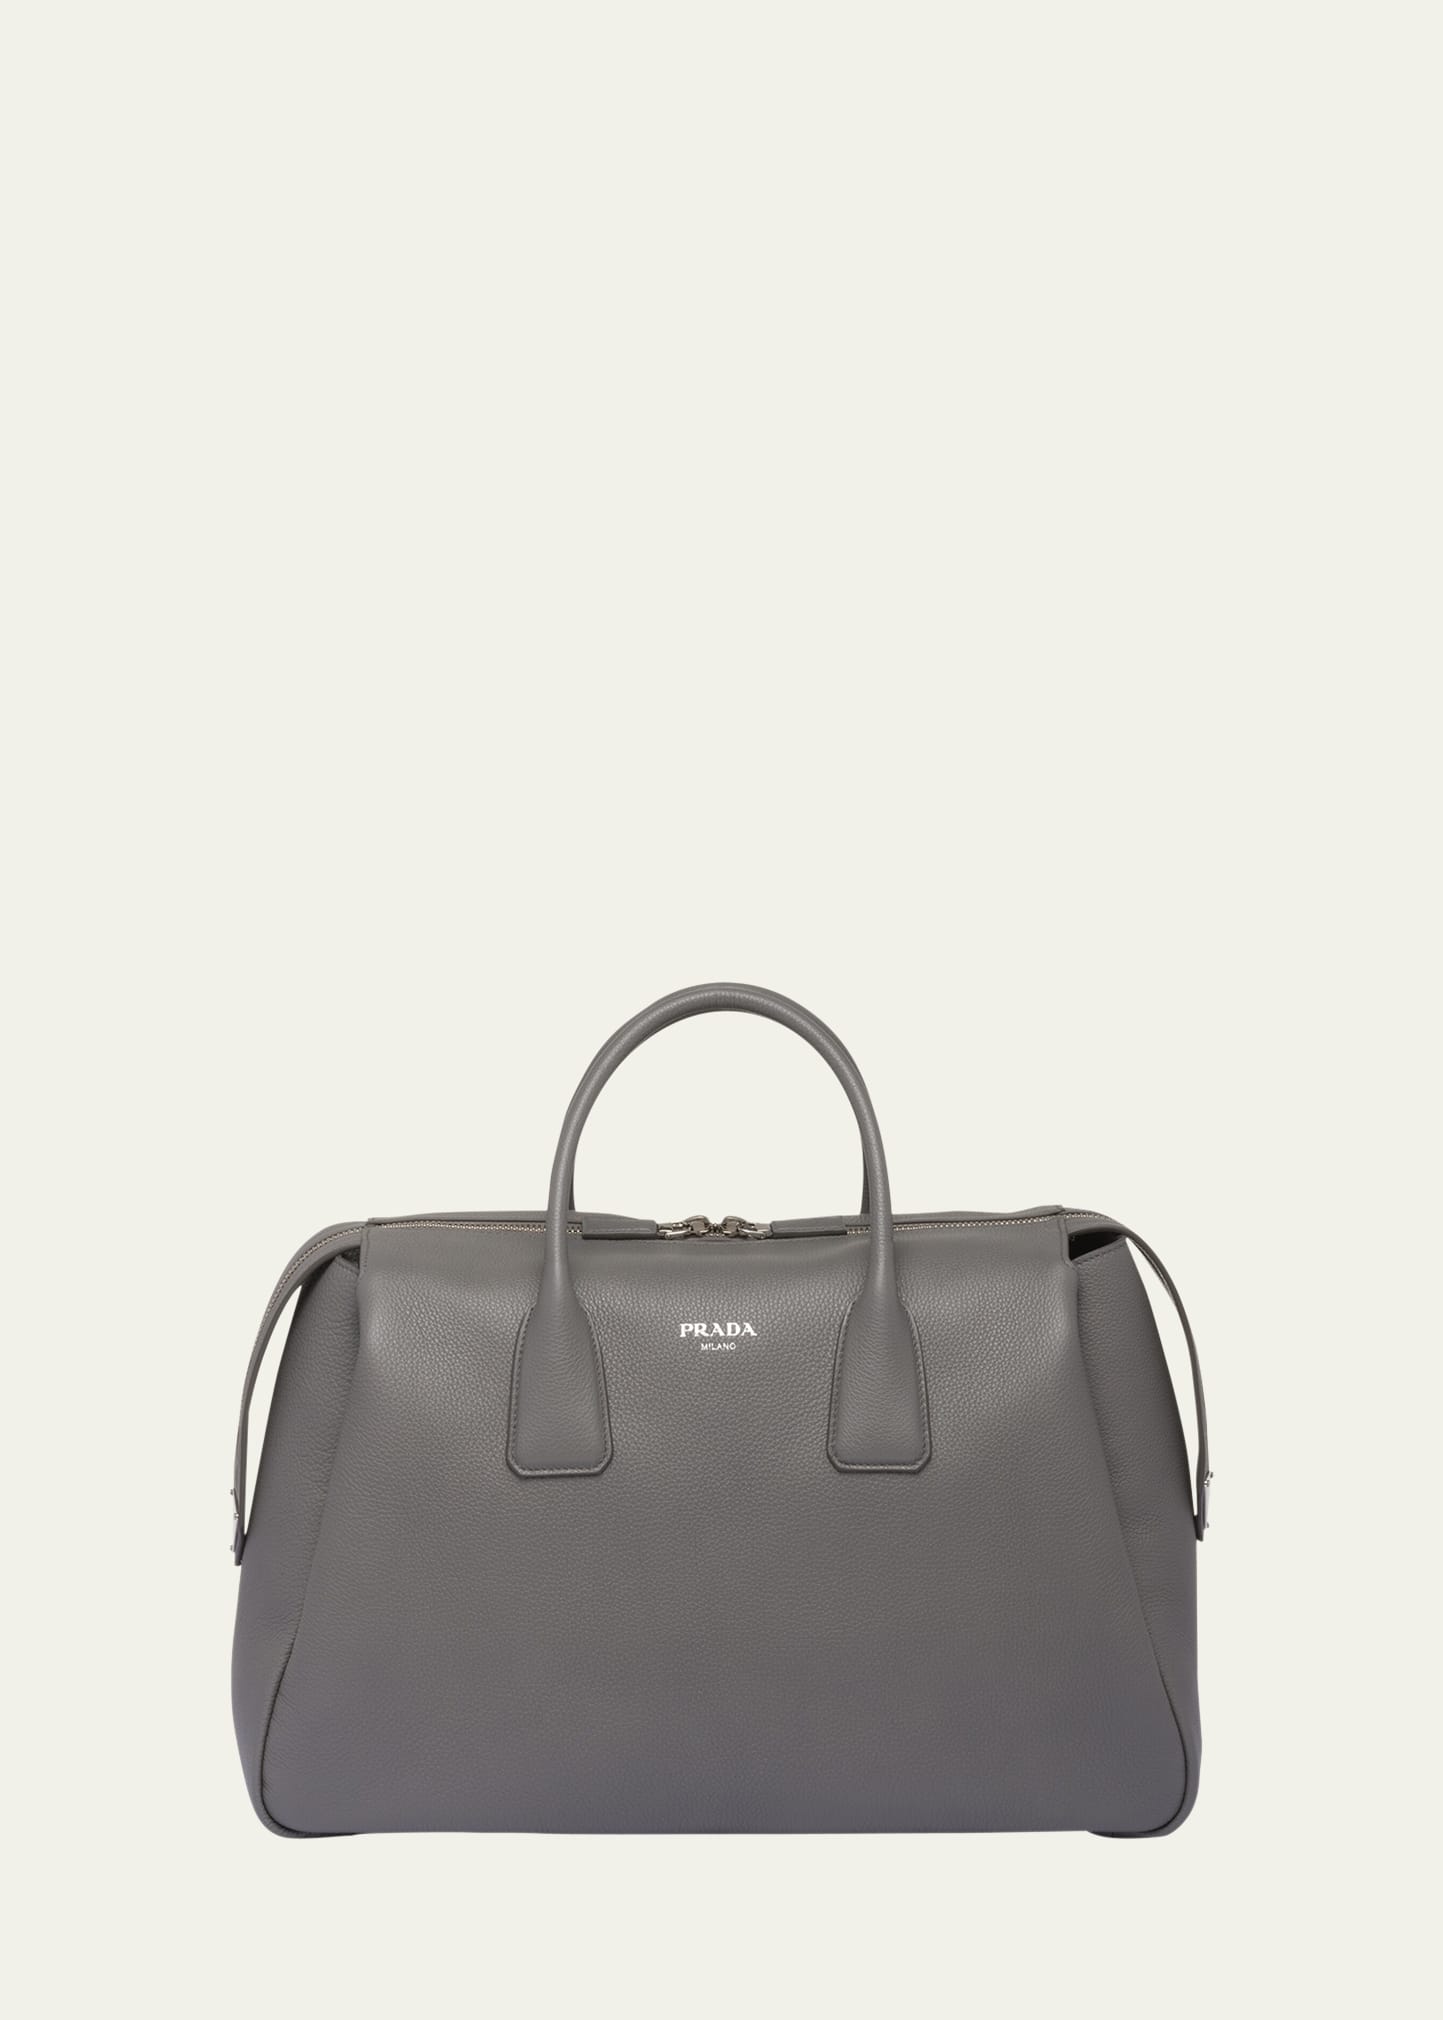 Shop Prada Men's Grained Leather Tote Bag In Marmo